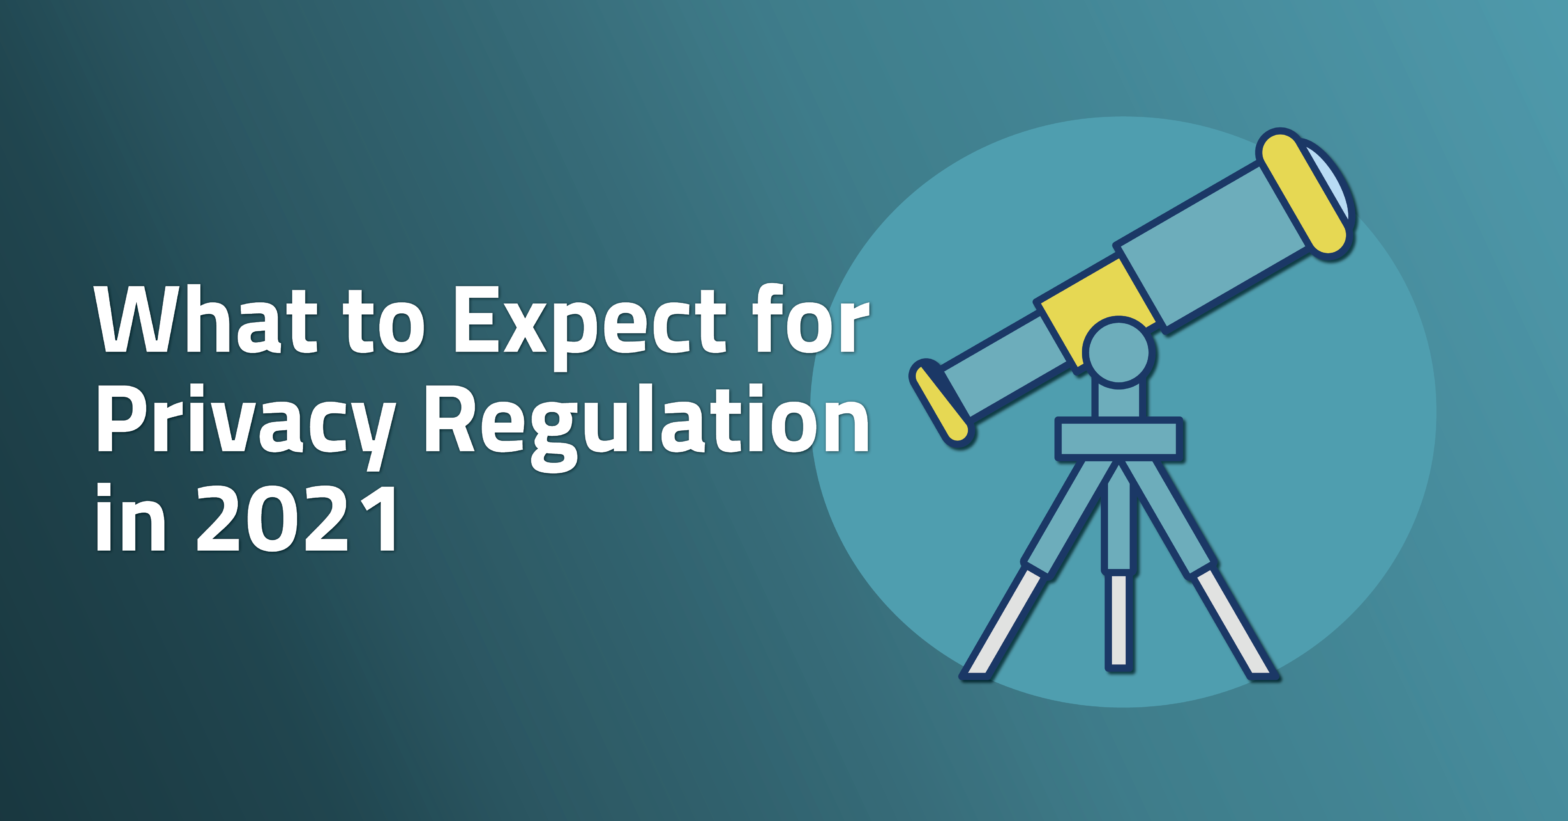 What to Expect for Privacy Regulation in 2021